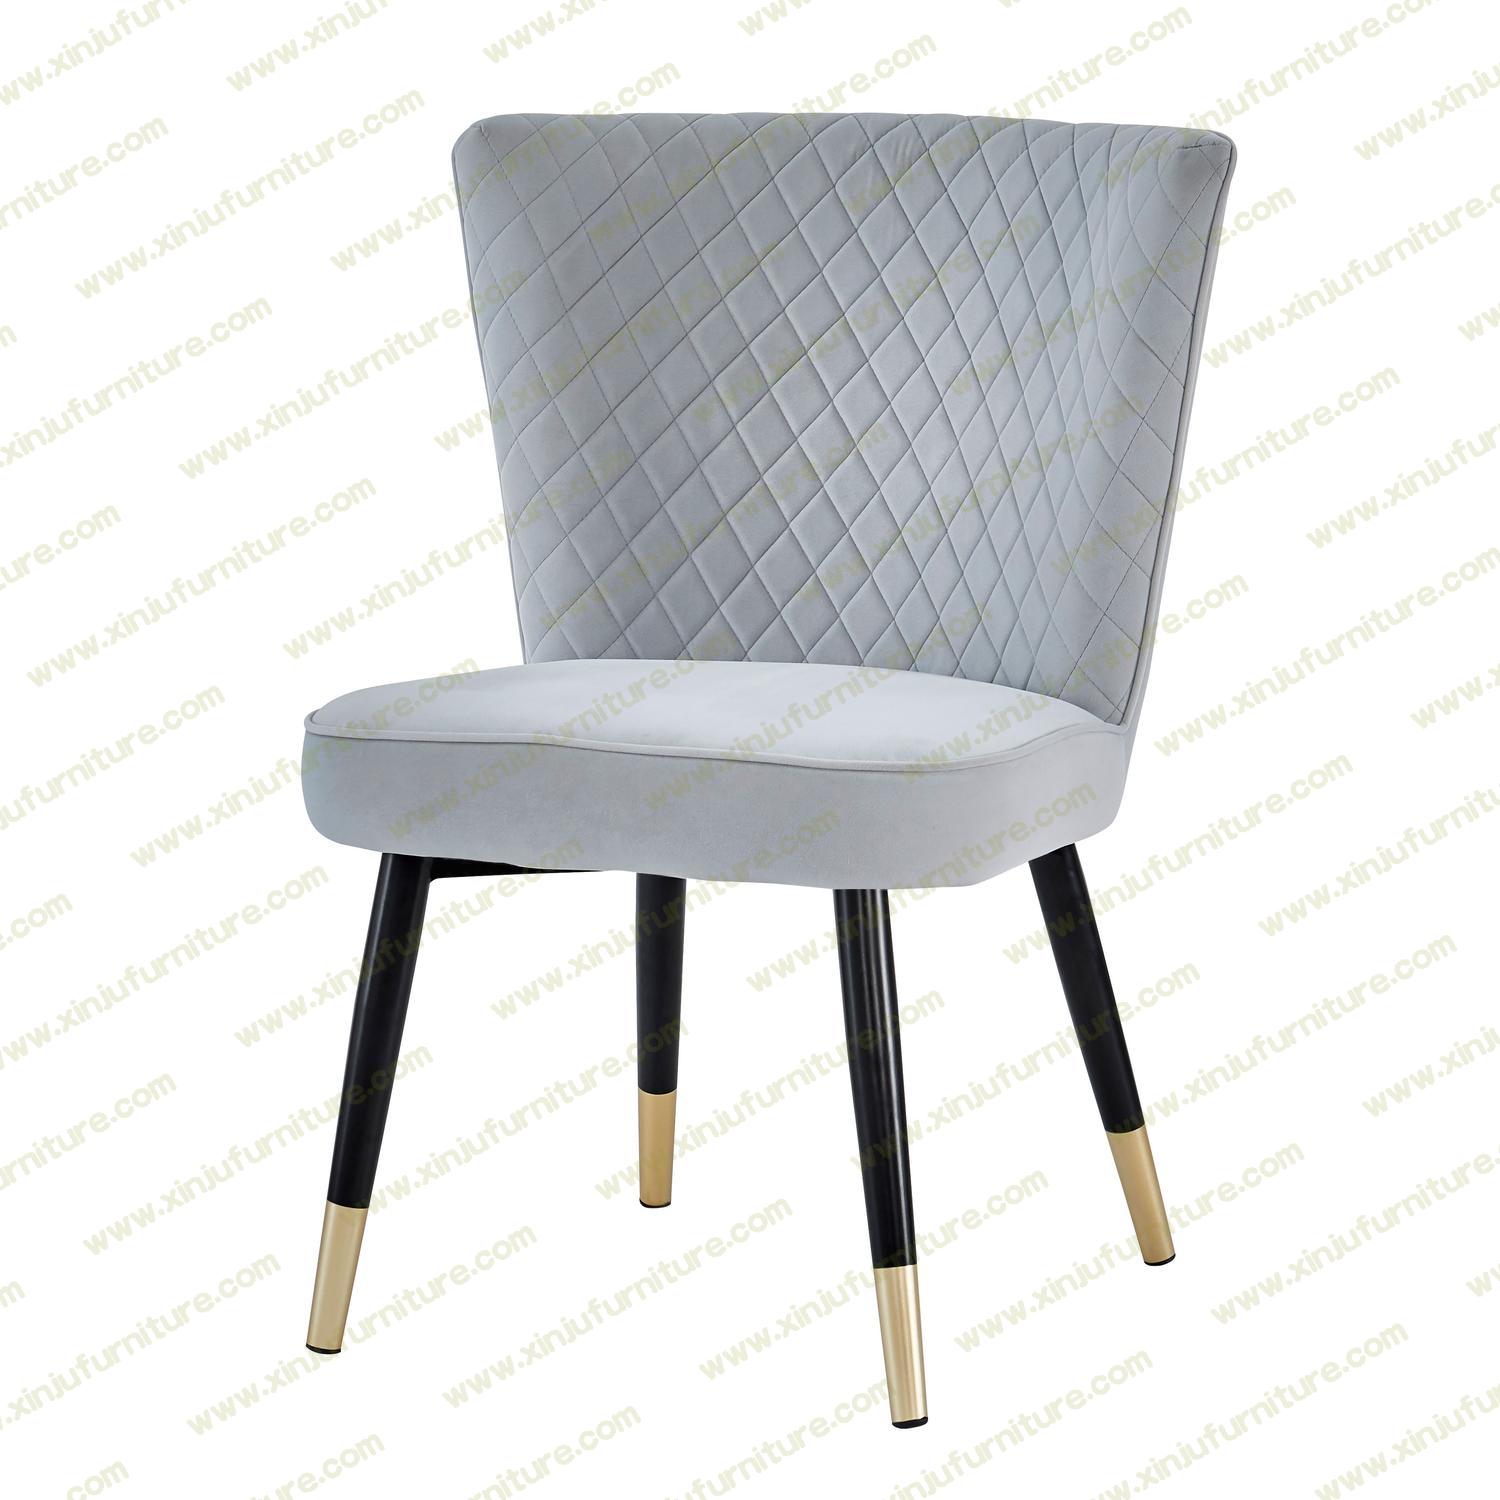 Light grey tufted dining chair